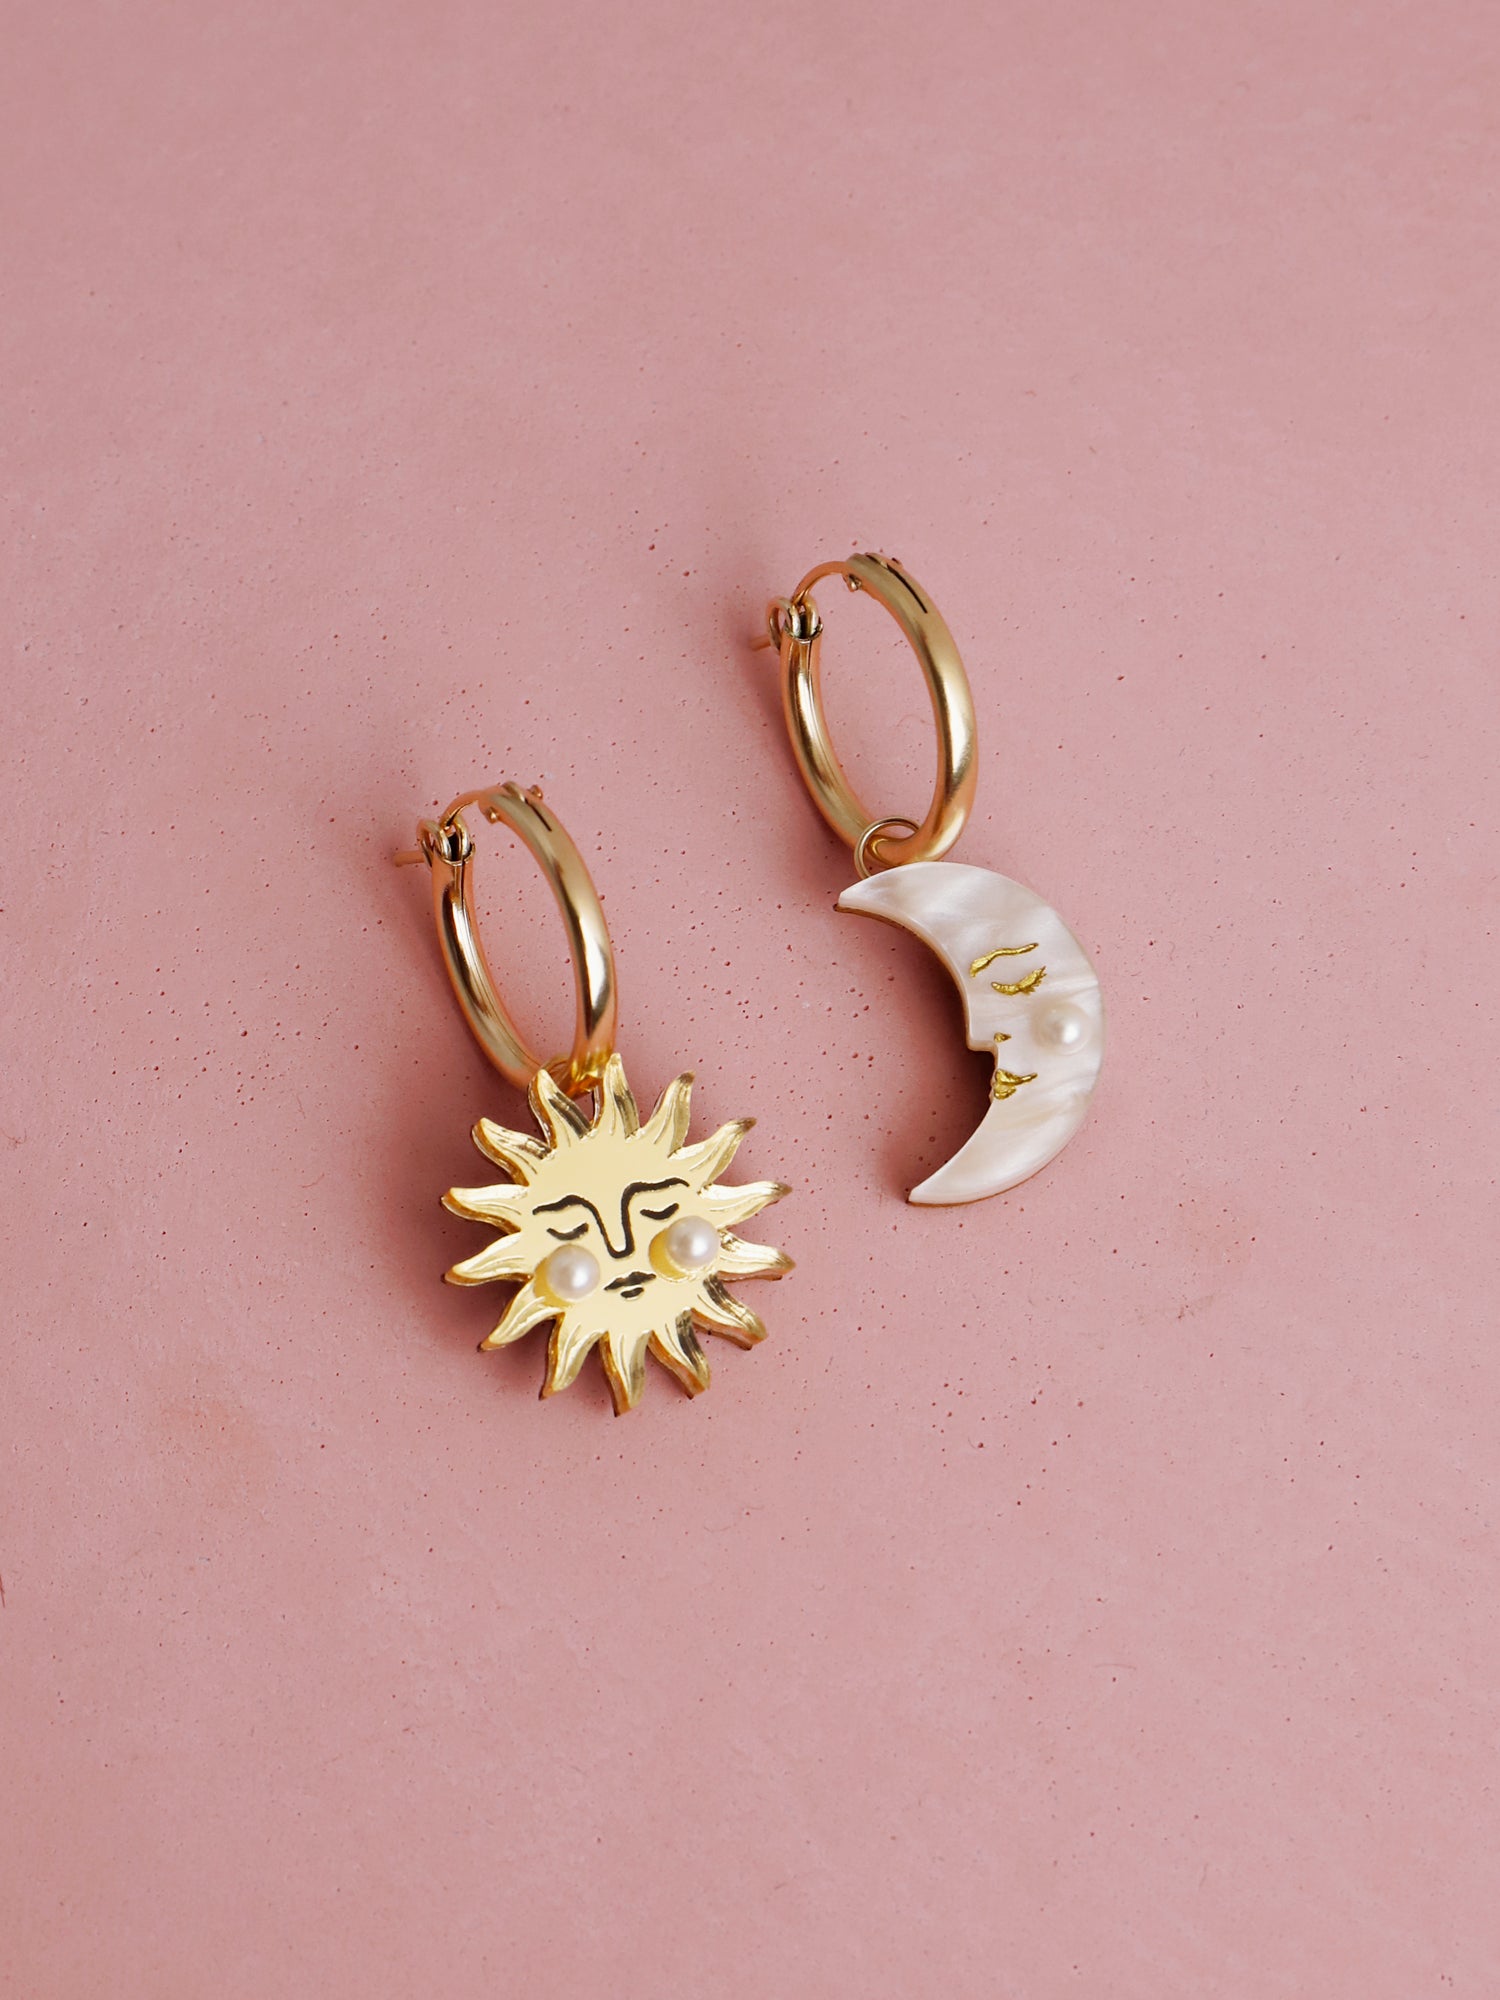 Sun & Moon Hoops. Charm earrings made with laser cut acrylic, Czech glass pearls and hand inked details. Handmade in the UK by Wolf & Moon.